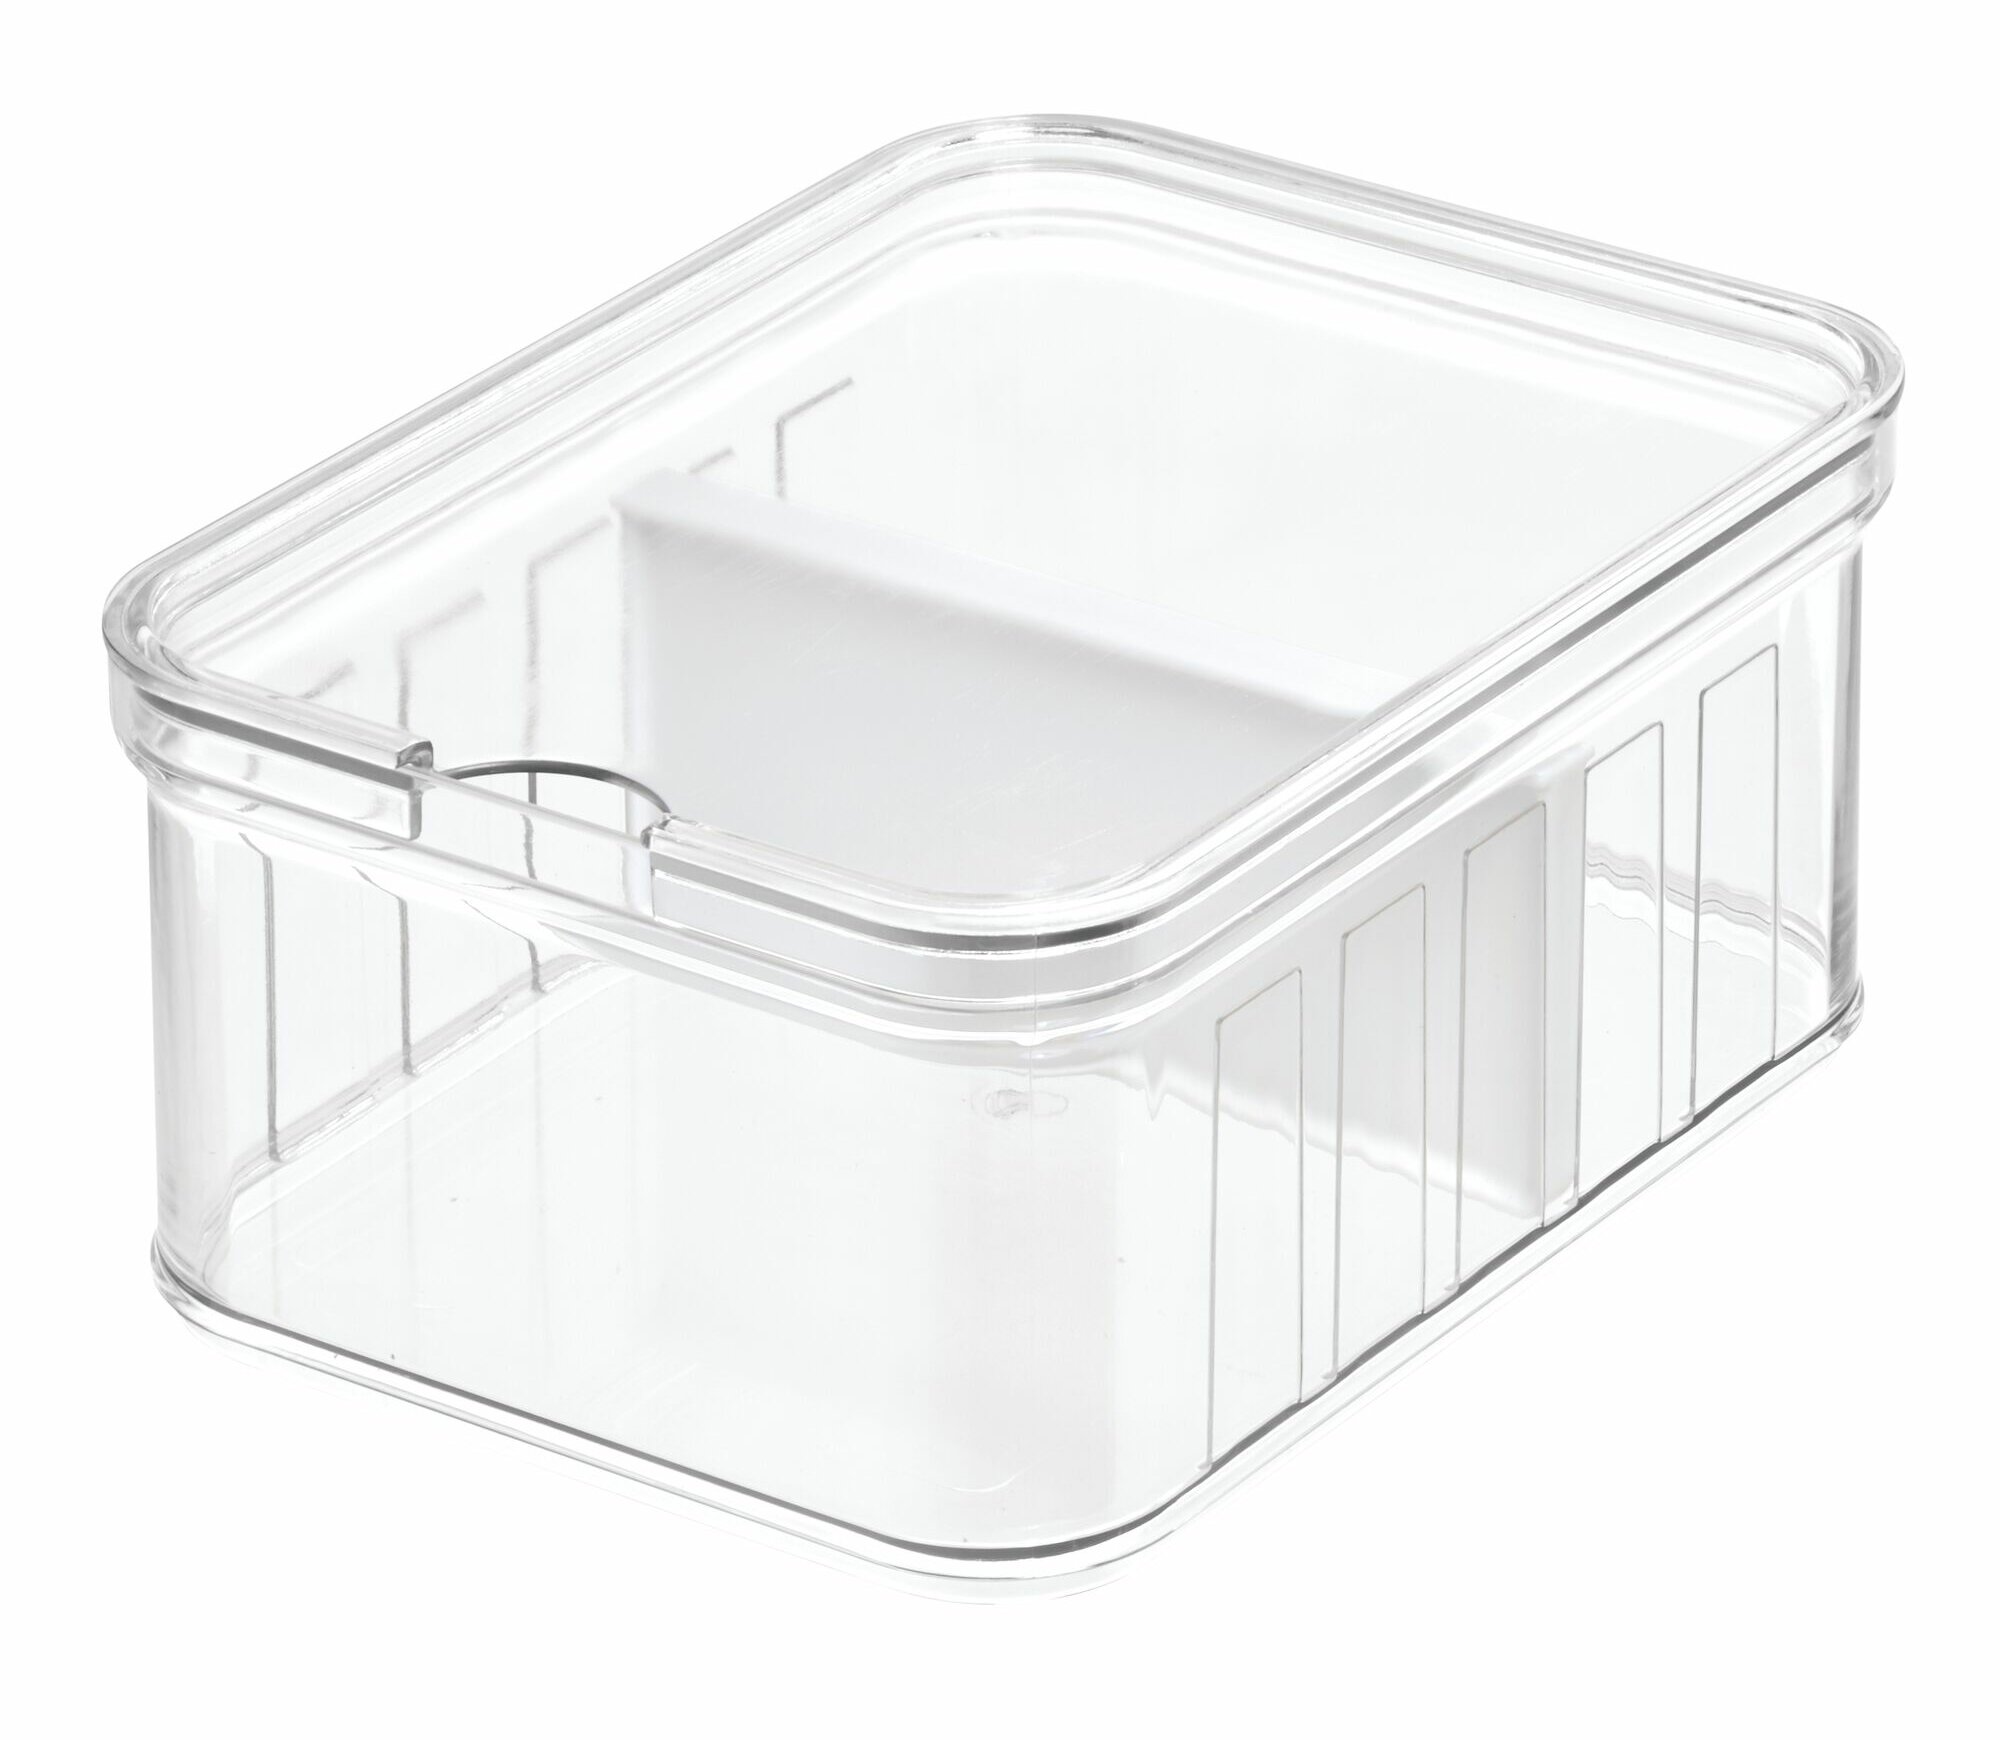 Clear Spices and More Kitchen Organiser for Tinned Foods 37.6 x 16 x 9.6 cm iDesign Fridge Storage Box Large Kitchen Storage Container Made of BPA-free Plastic